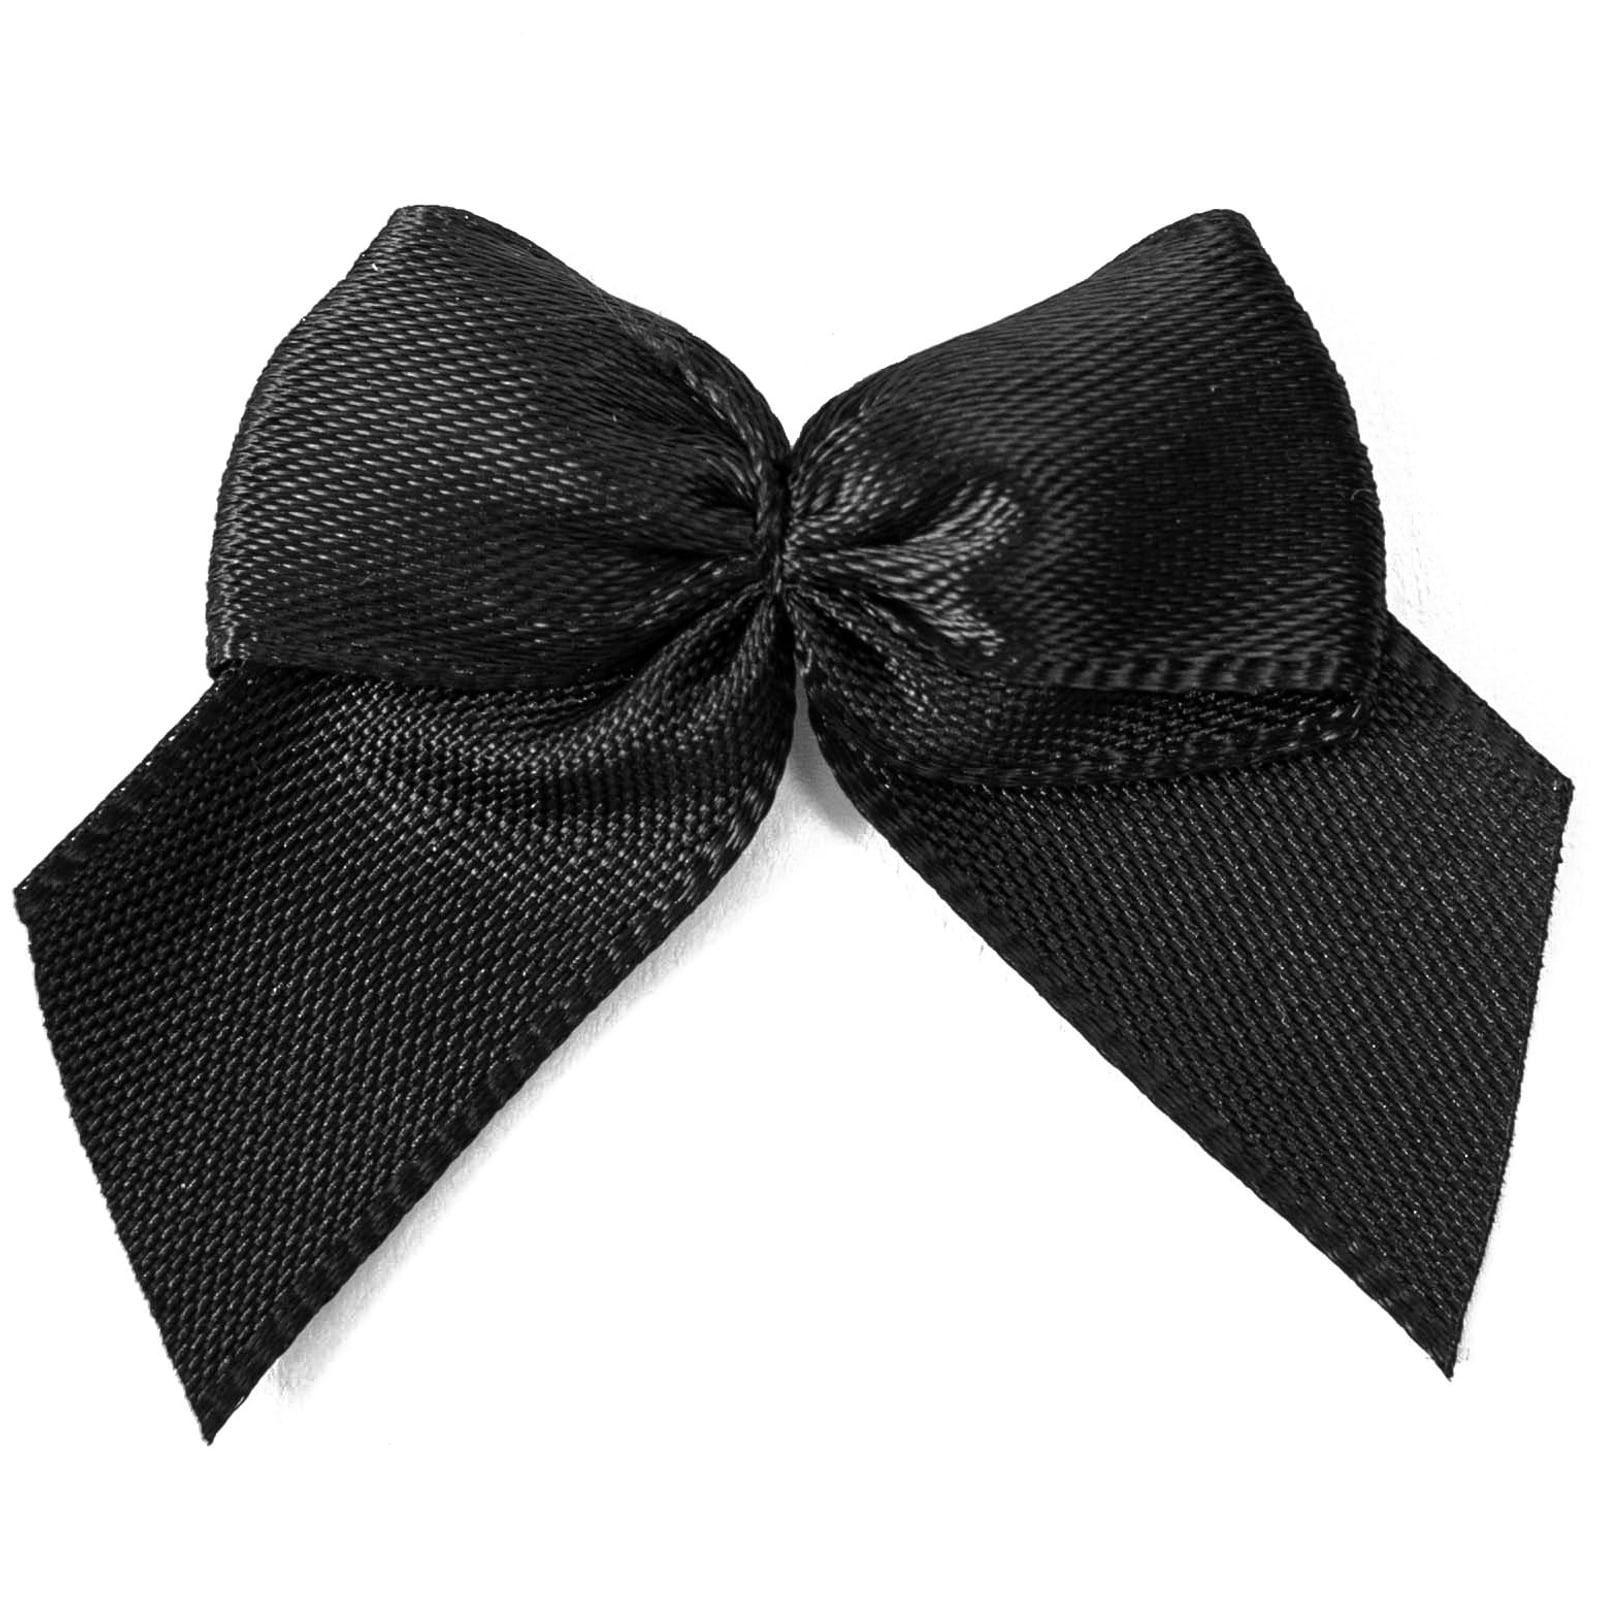 200 Pack Mini Black Satin Bows for Gift Wrapping, Self Adhesive Ribbons for  DIY Crafts, Scrapbooking, 1.5 in 